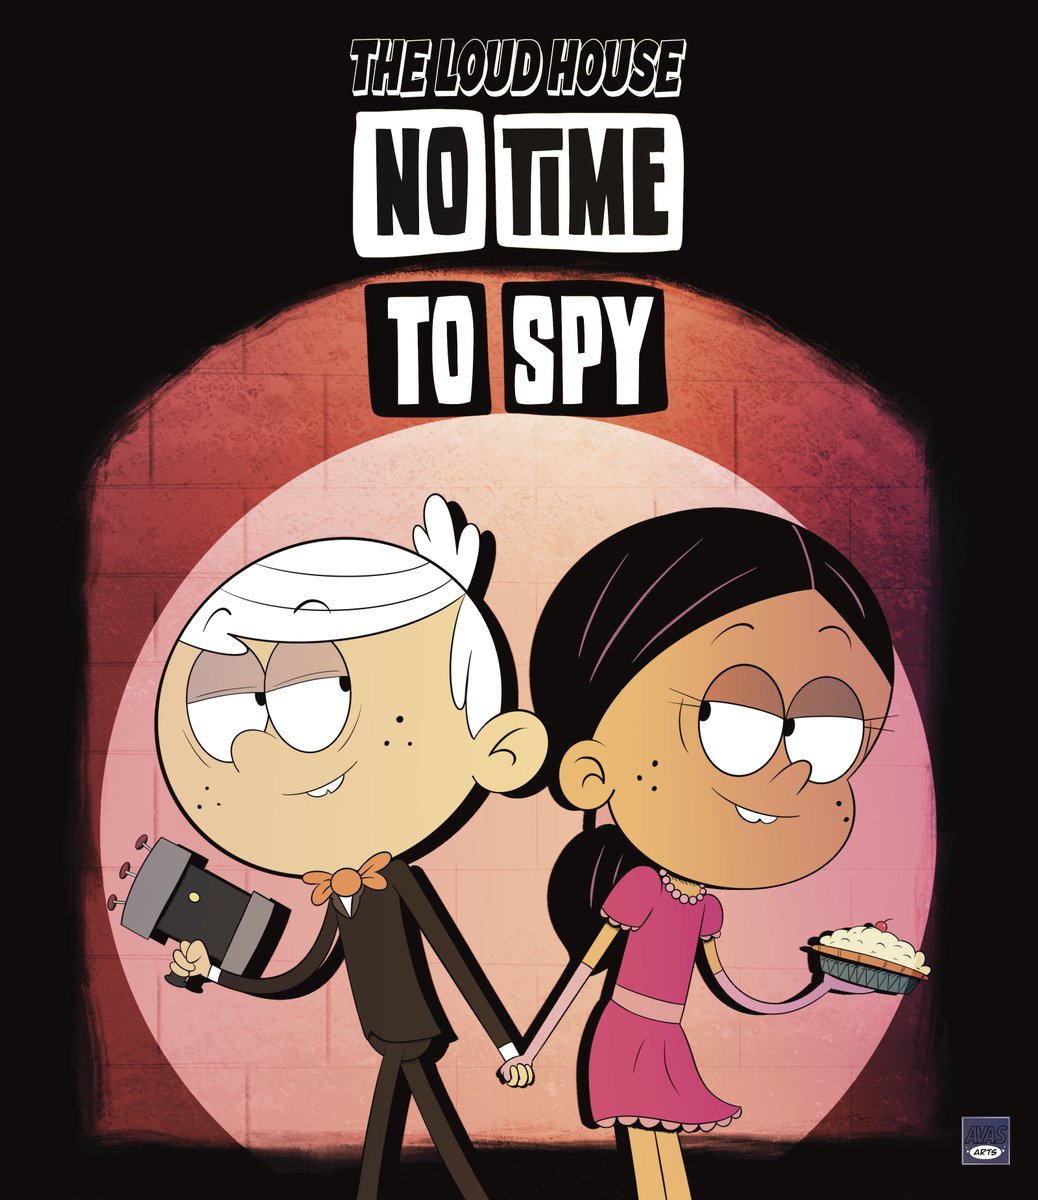 No Time To Spy (Ronniecoln)

Decided to make a Ronniecoln artwork with the upcoming Loud House movie sequel 'No Time to Spy'. Also a sort of late artwork for the 8 year anniversary of 'The Loud House'

#TheLoudHouse #NoTimetoSpyALoudHouseMovie #fanart #RonnieColn #Nickelodeon